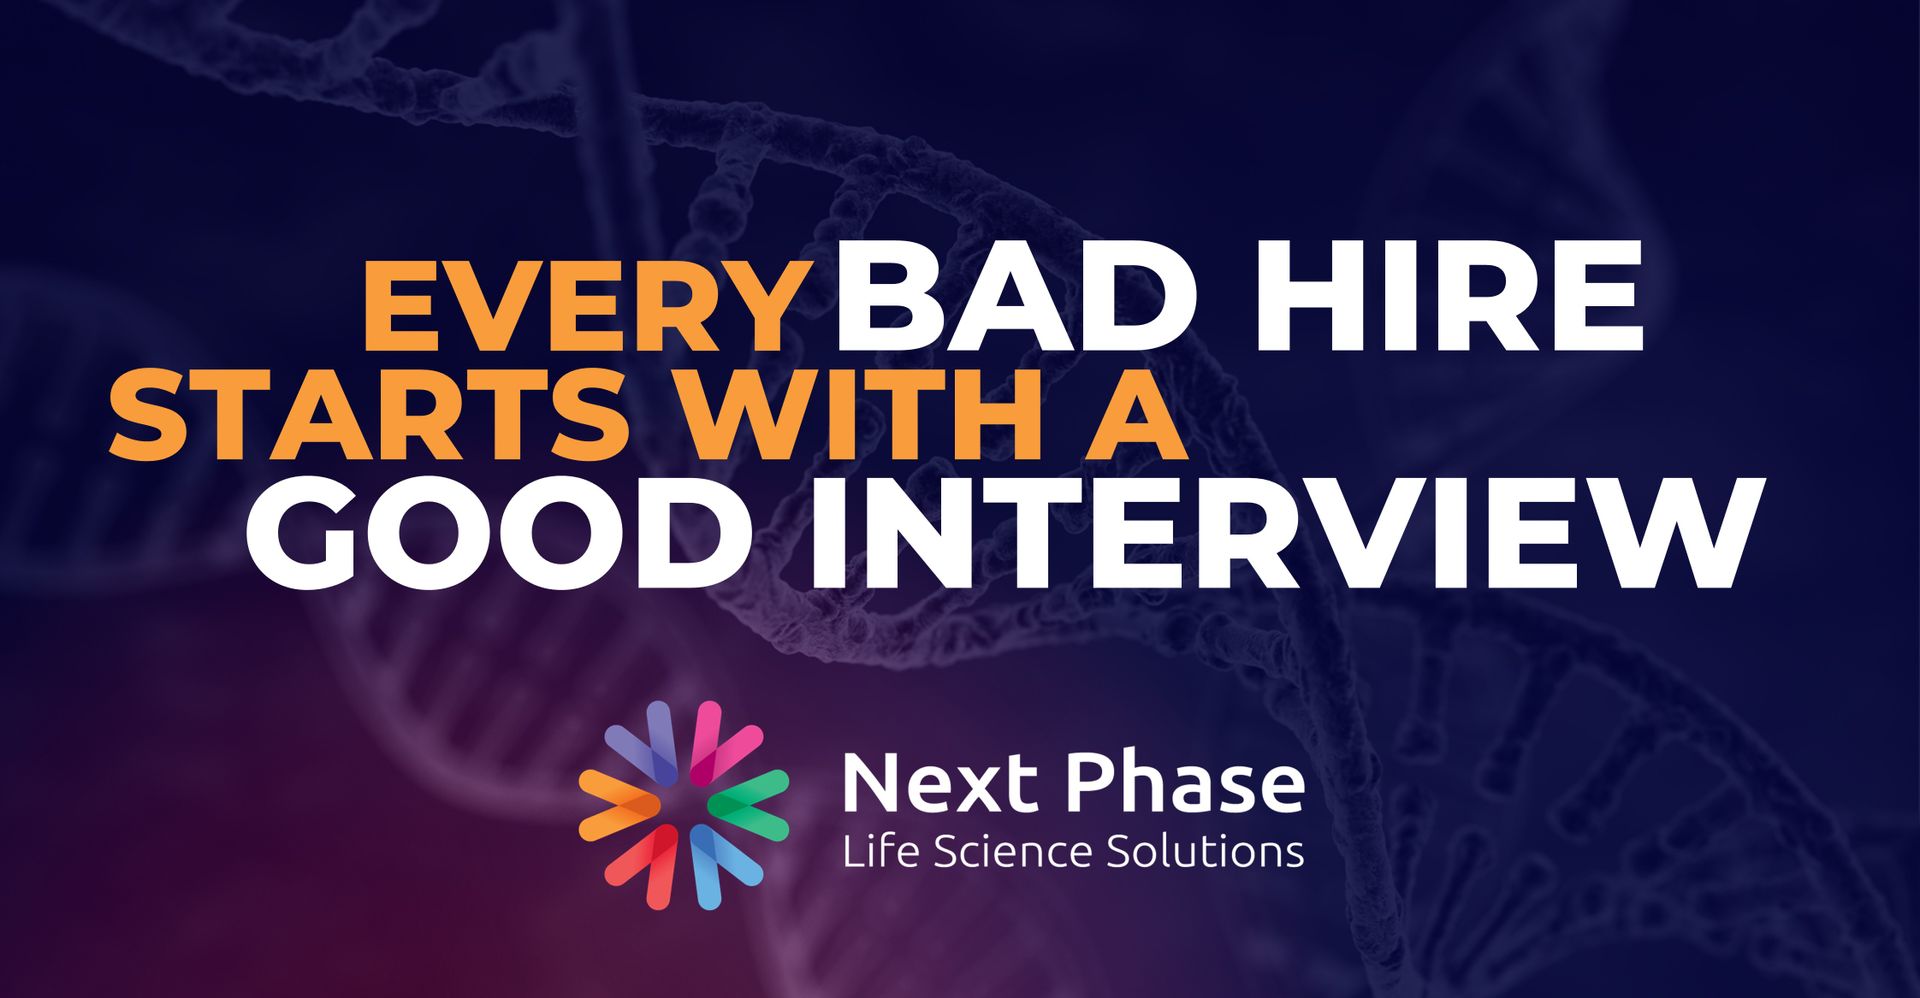 Next Phase - Every "bad hire" starts with a good interview